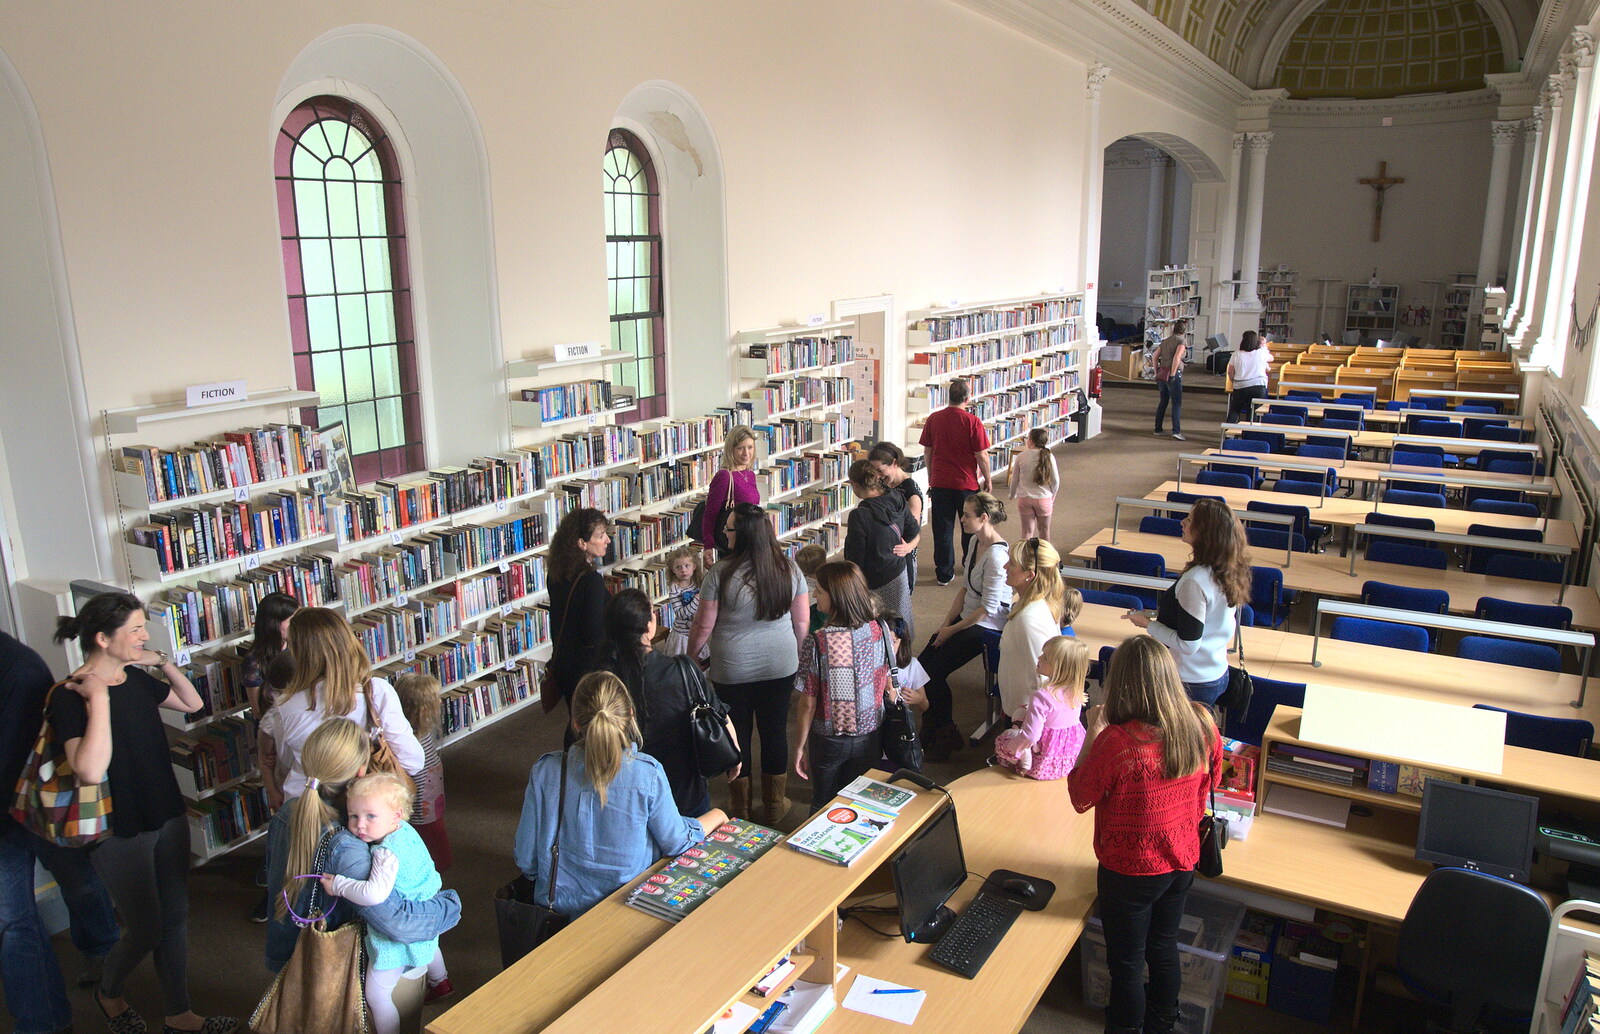 The library used to be forbidden to students from Sion Hill and Blackrock for the Day, Dublin, Ireland - 17th September 2016